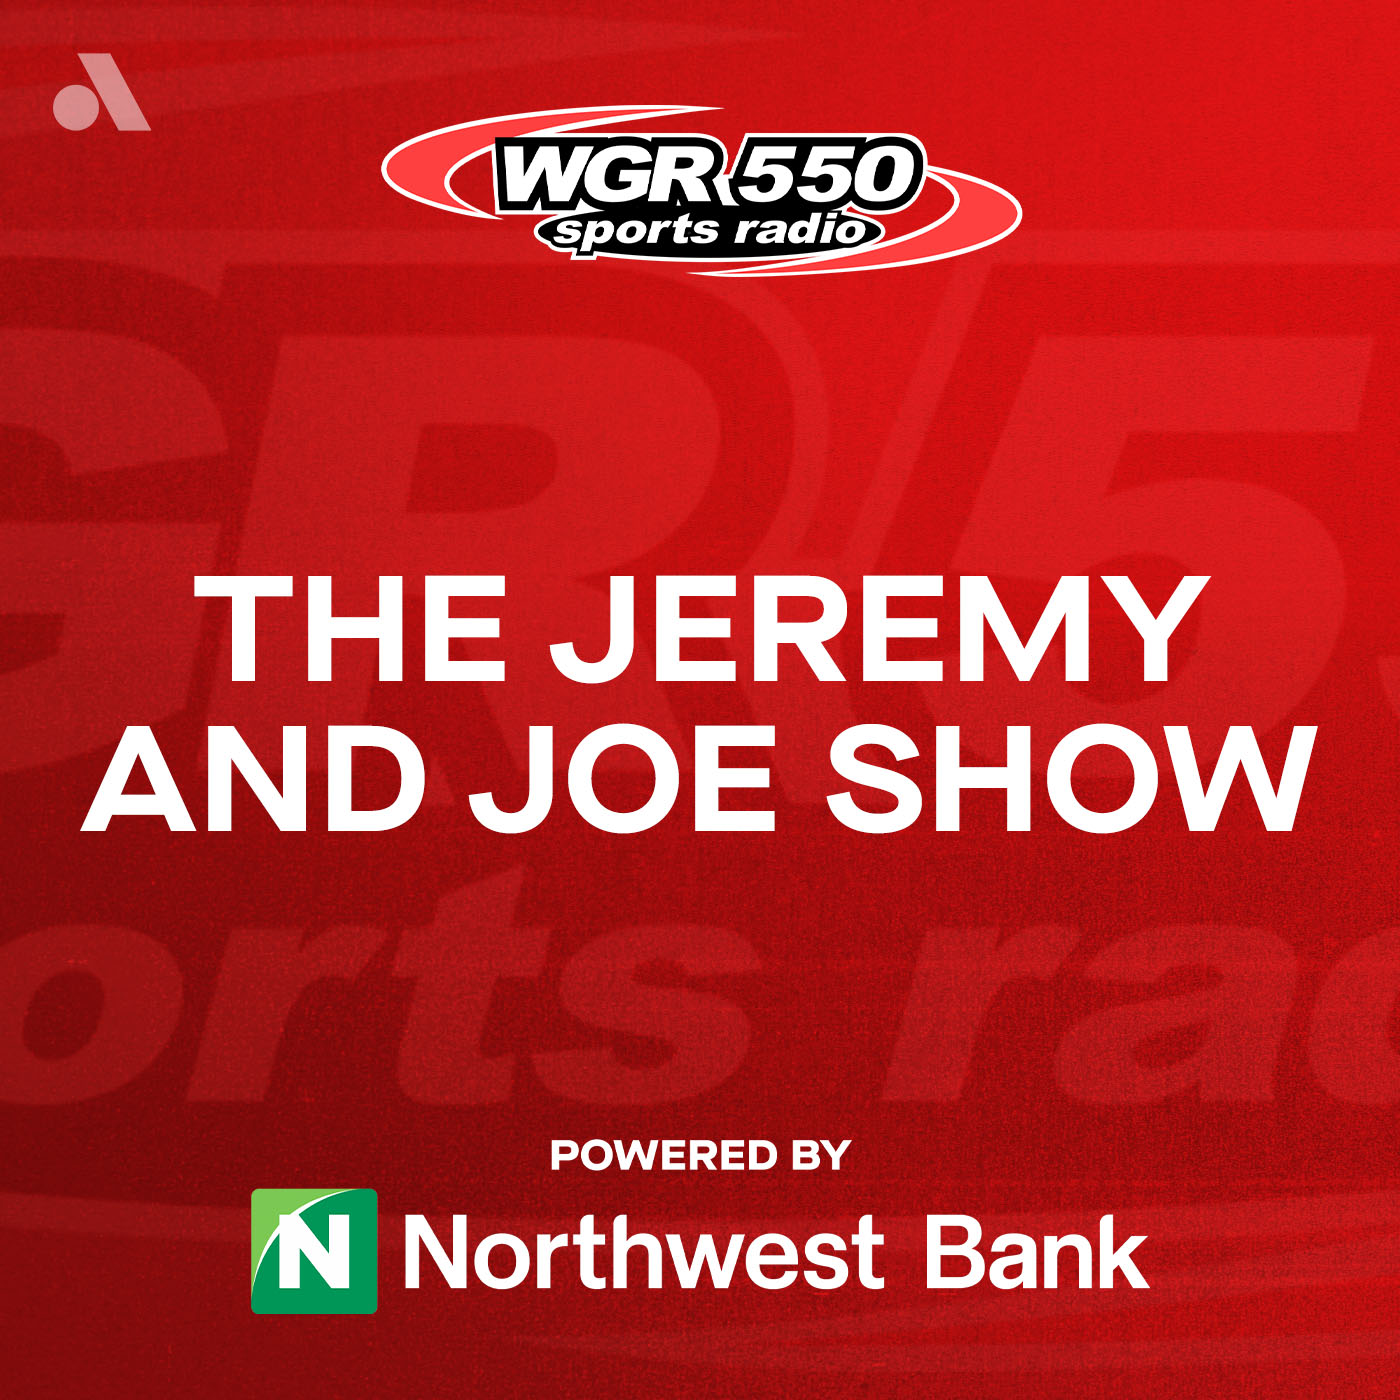 The Jeremy and Joe Show - 4/25 Full Show